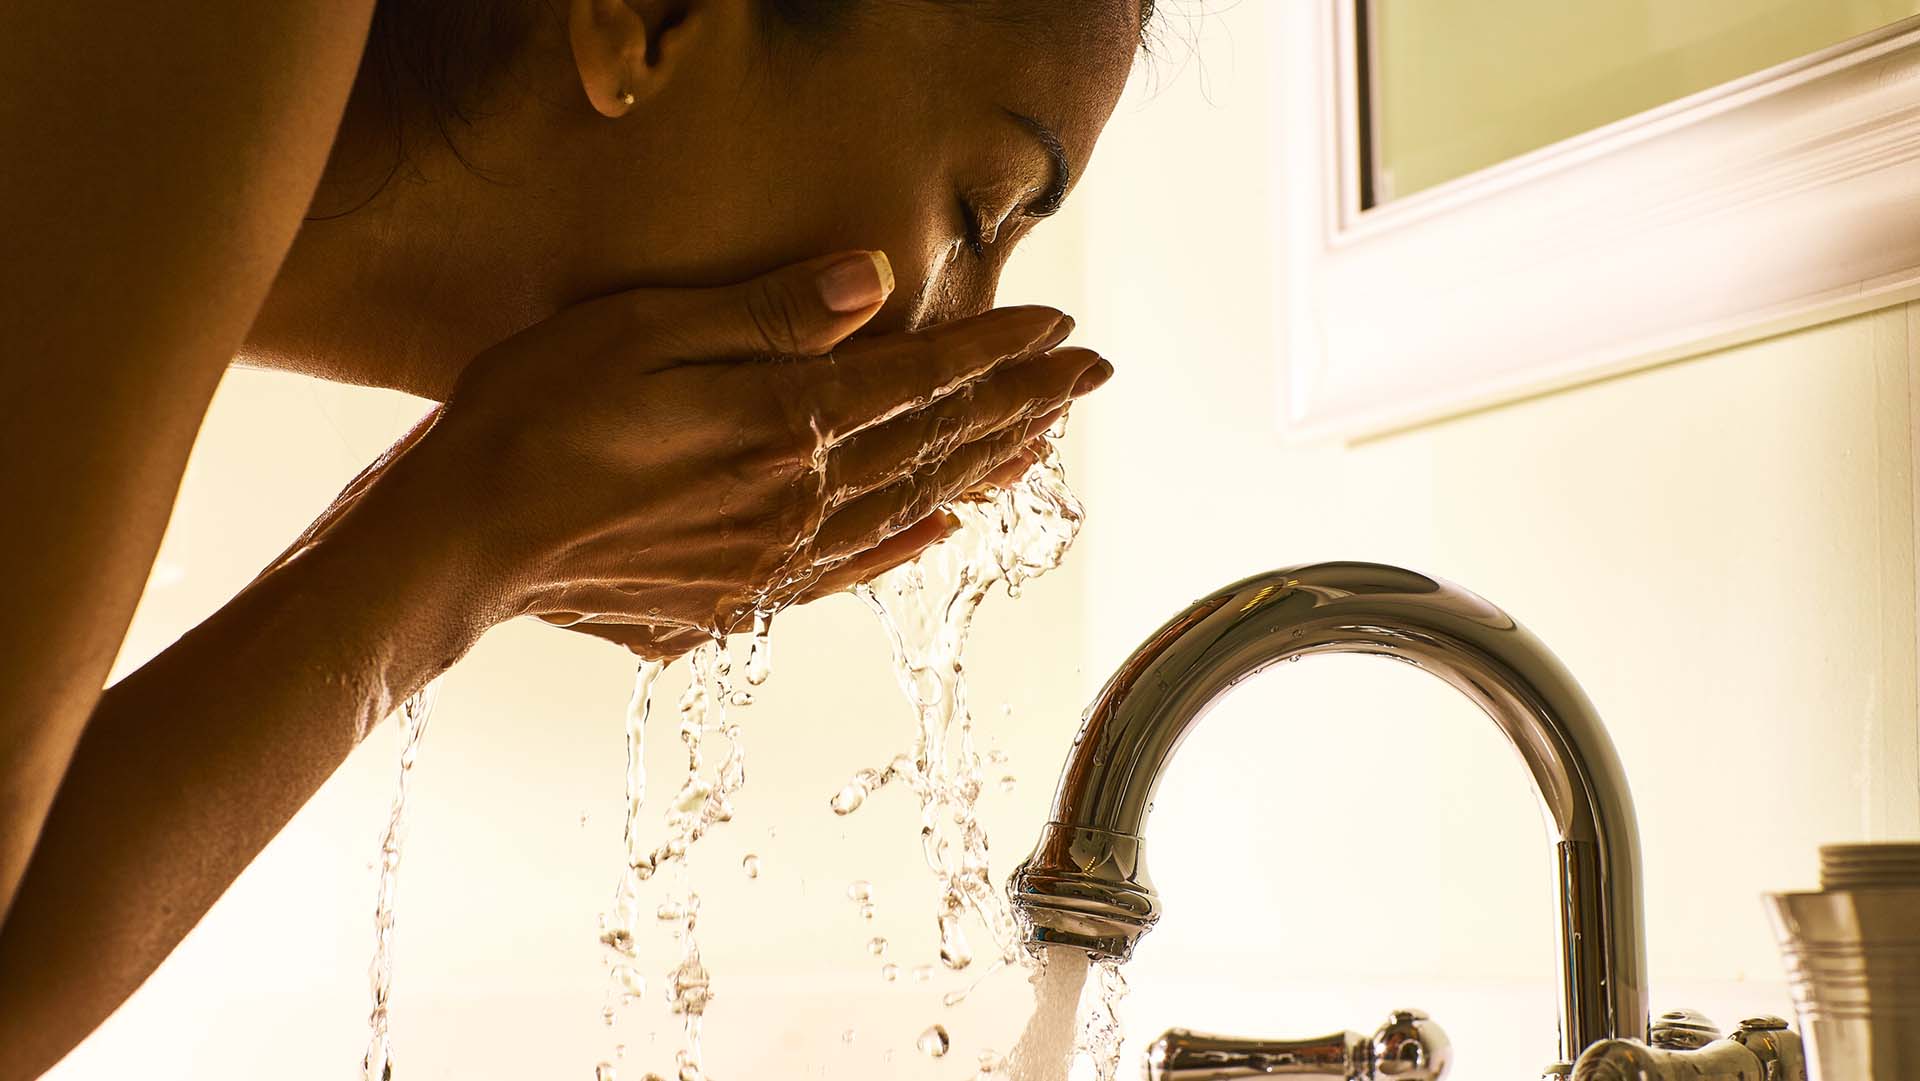 Woman washing face at home using bathroom sink with stainless faucet.